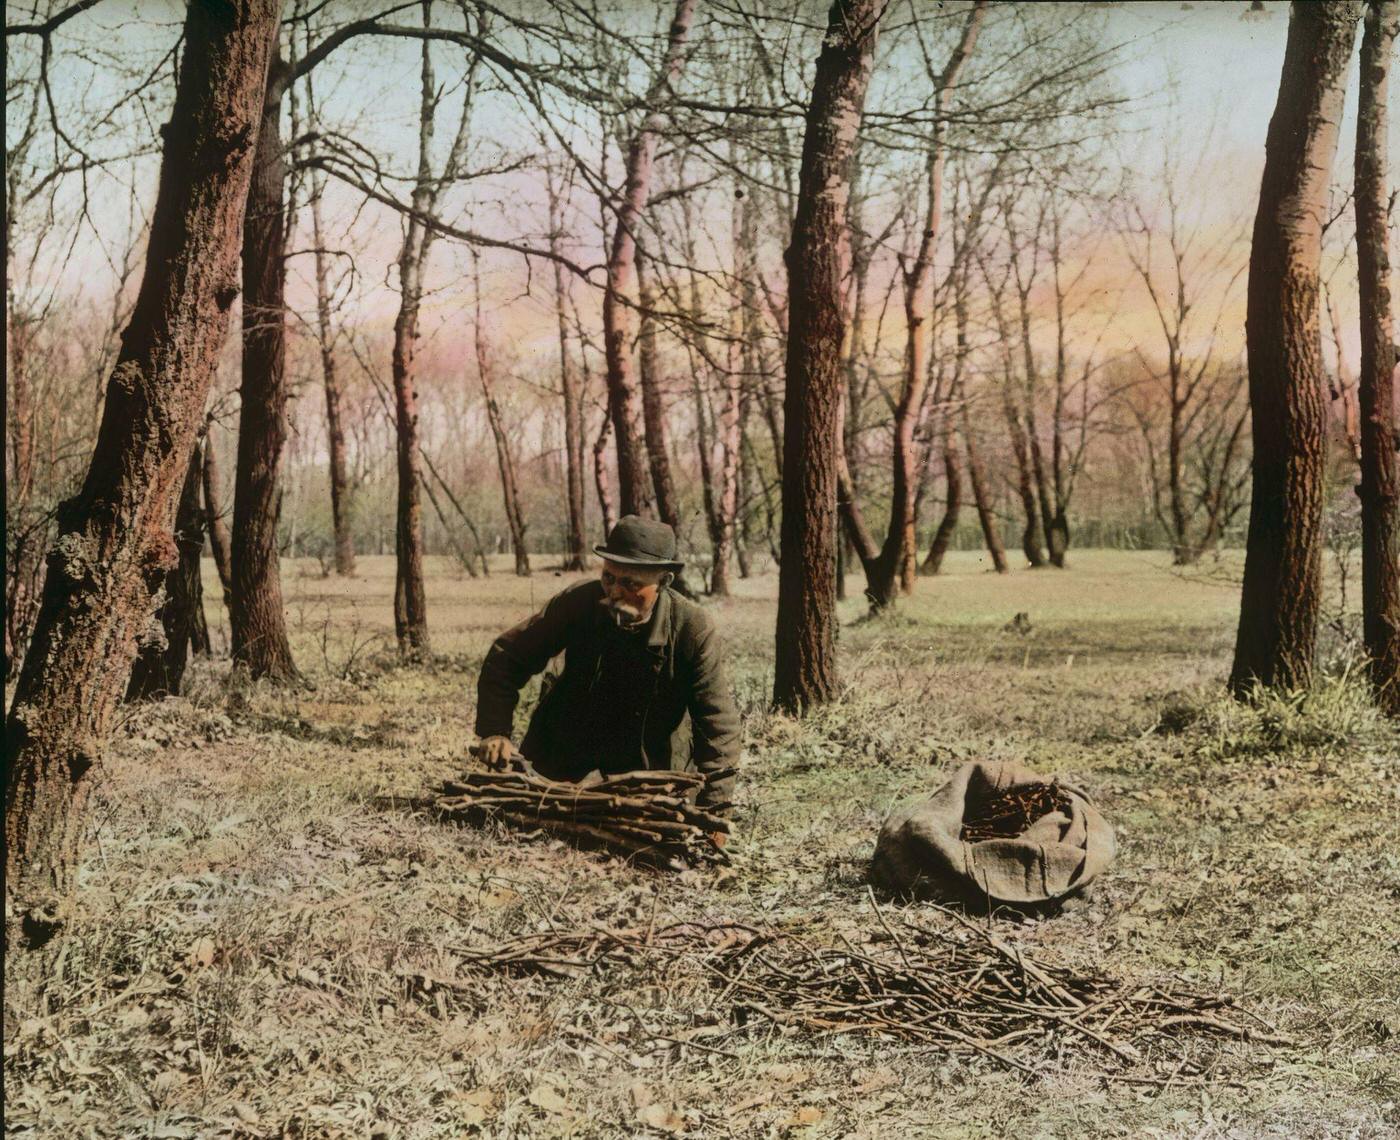 Man gathering firewood in the Viennese Prater, 1905.